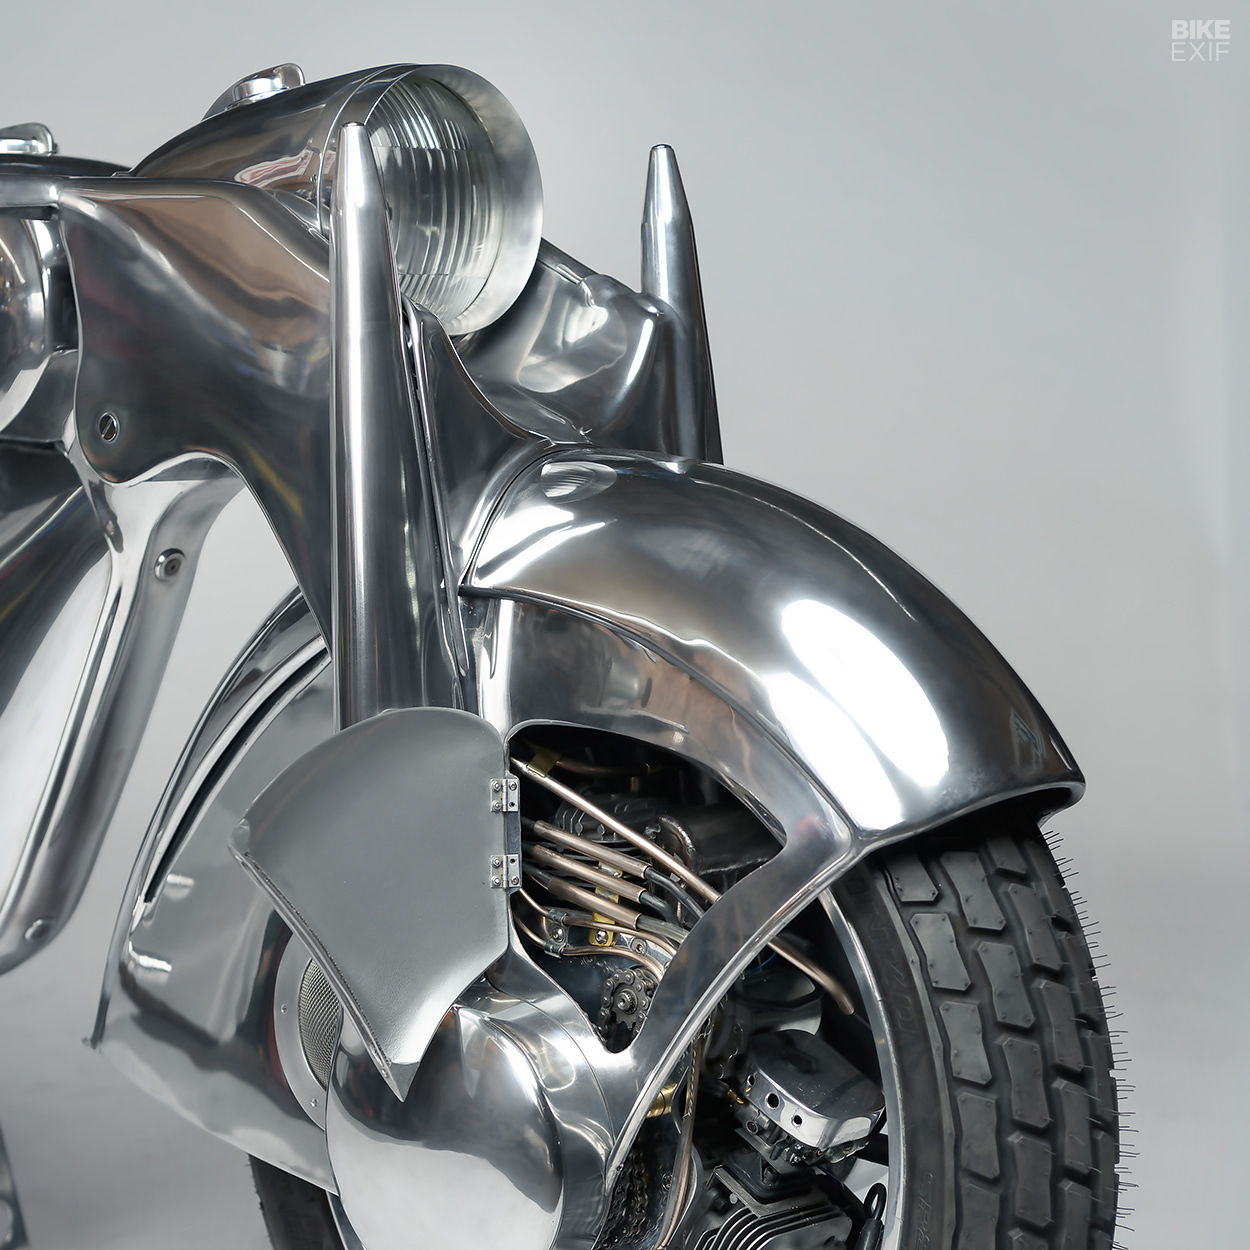 Motorcycle Art: A front-wheel-drive motorcycle by Rodsmith for the Haas Museum